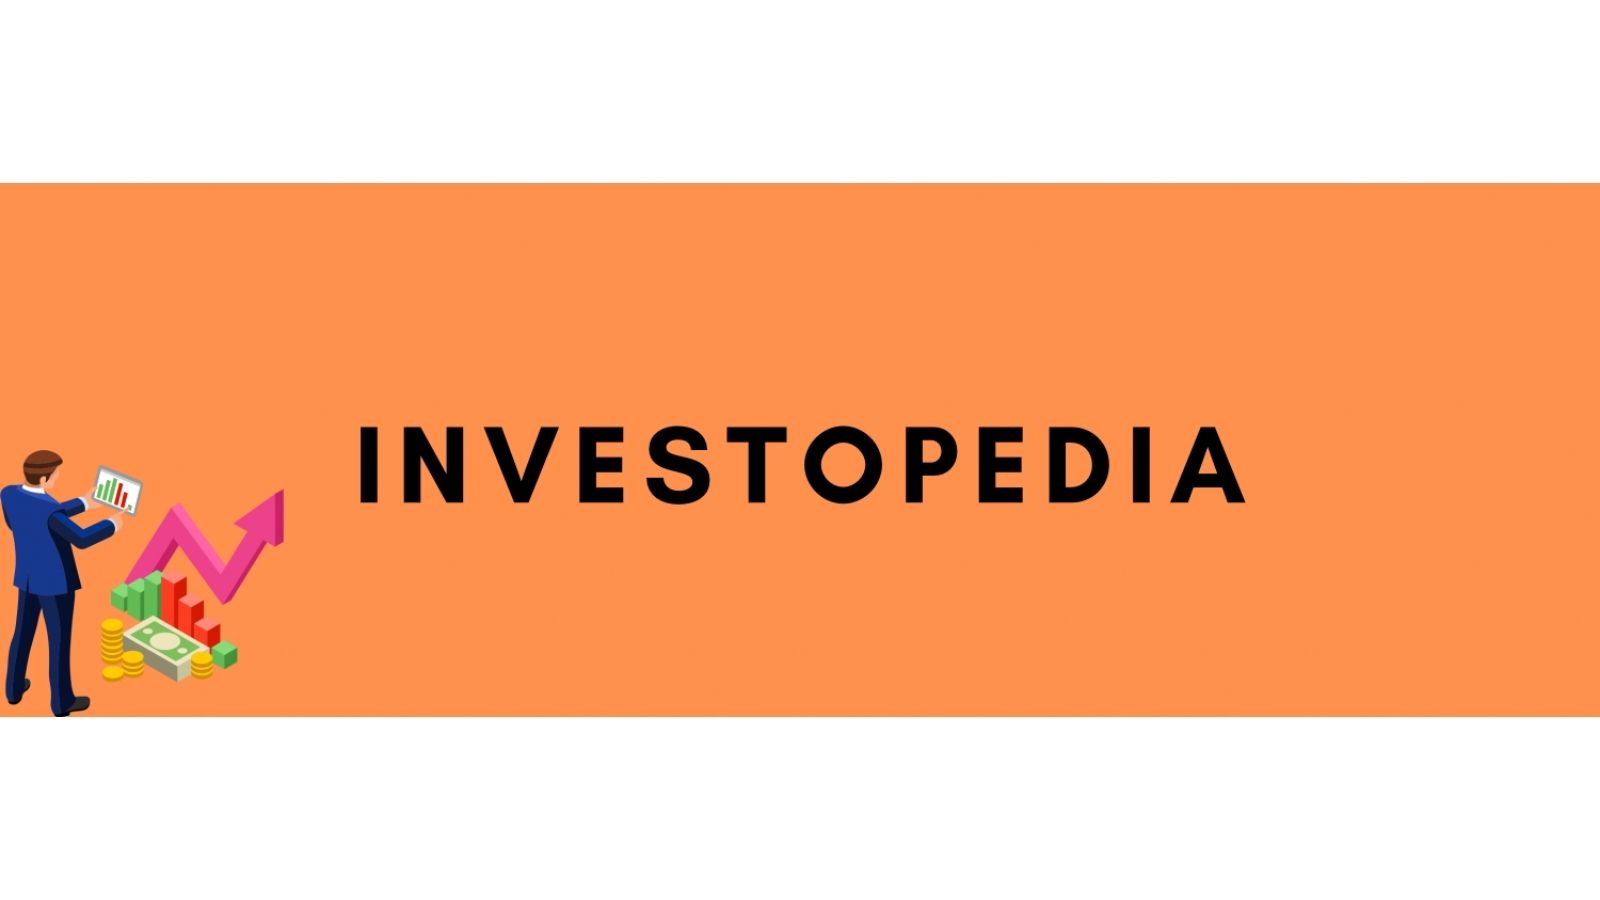 Find detailed information about InvestoPedia